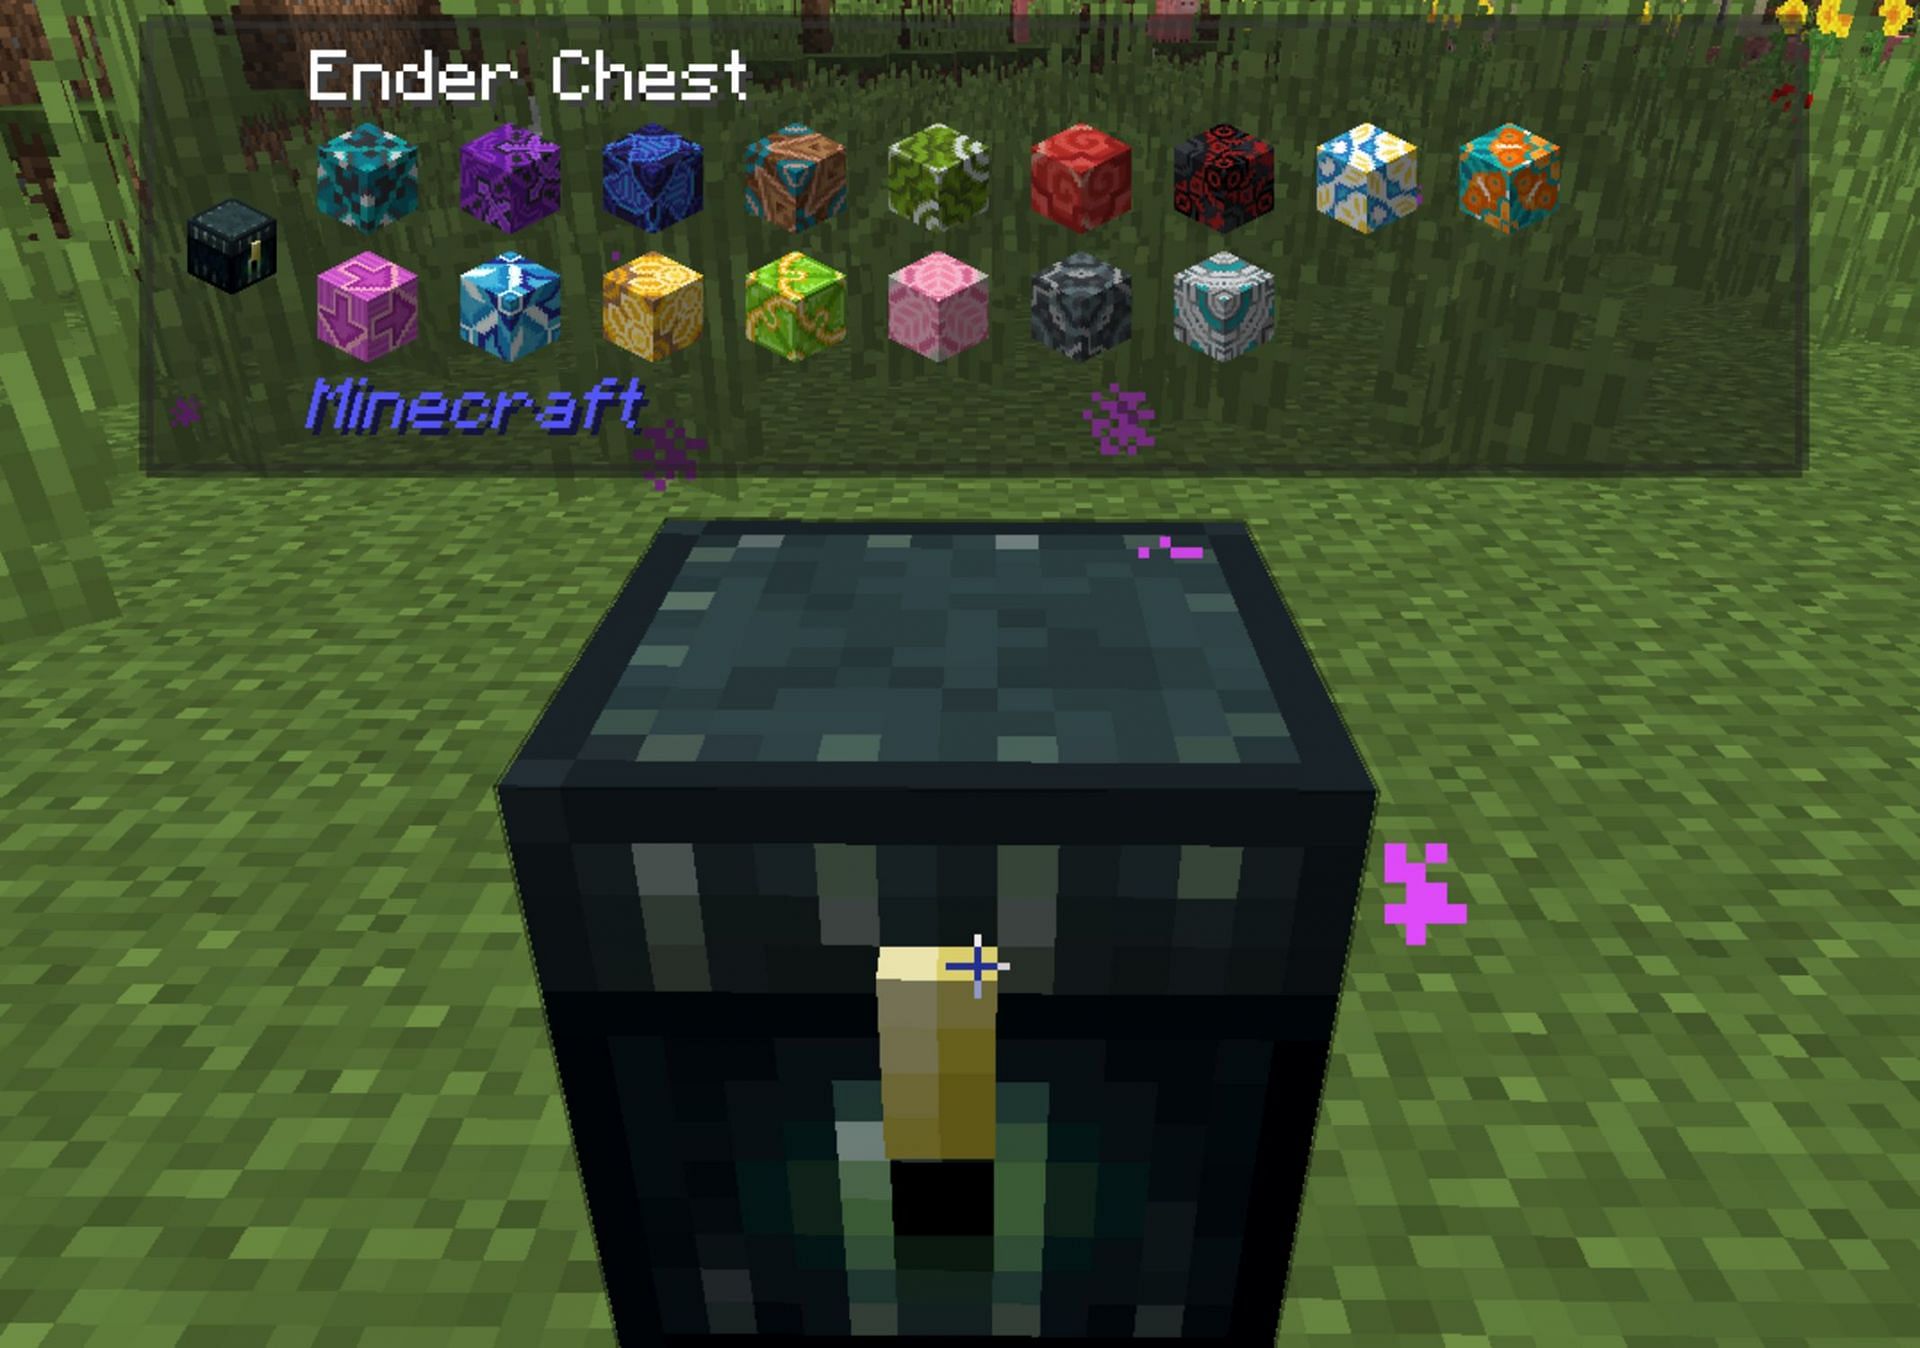 Quality of life mods improve basic functions of the game to make them more convenient (Image via Mojang)